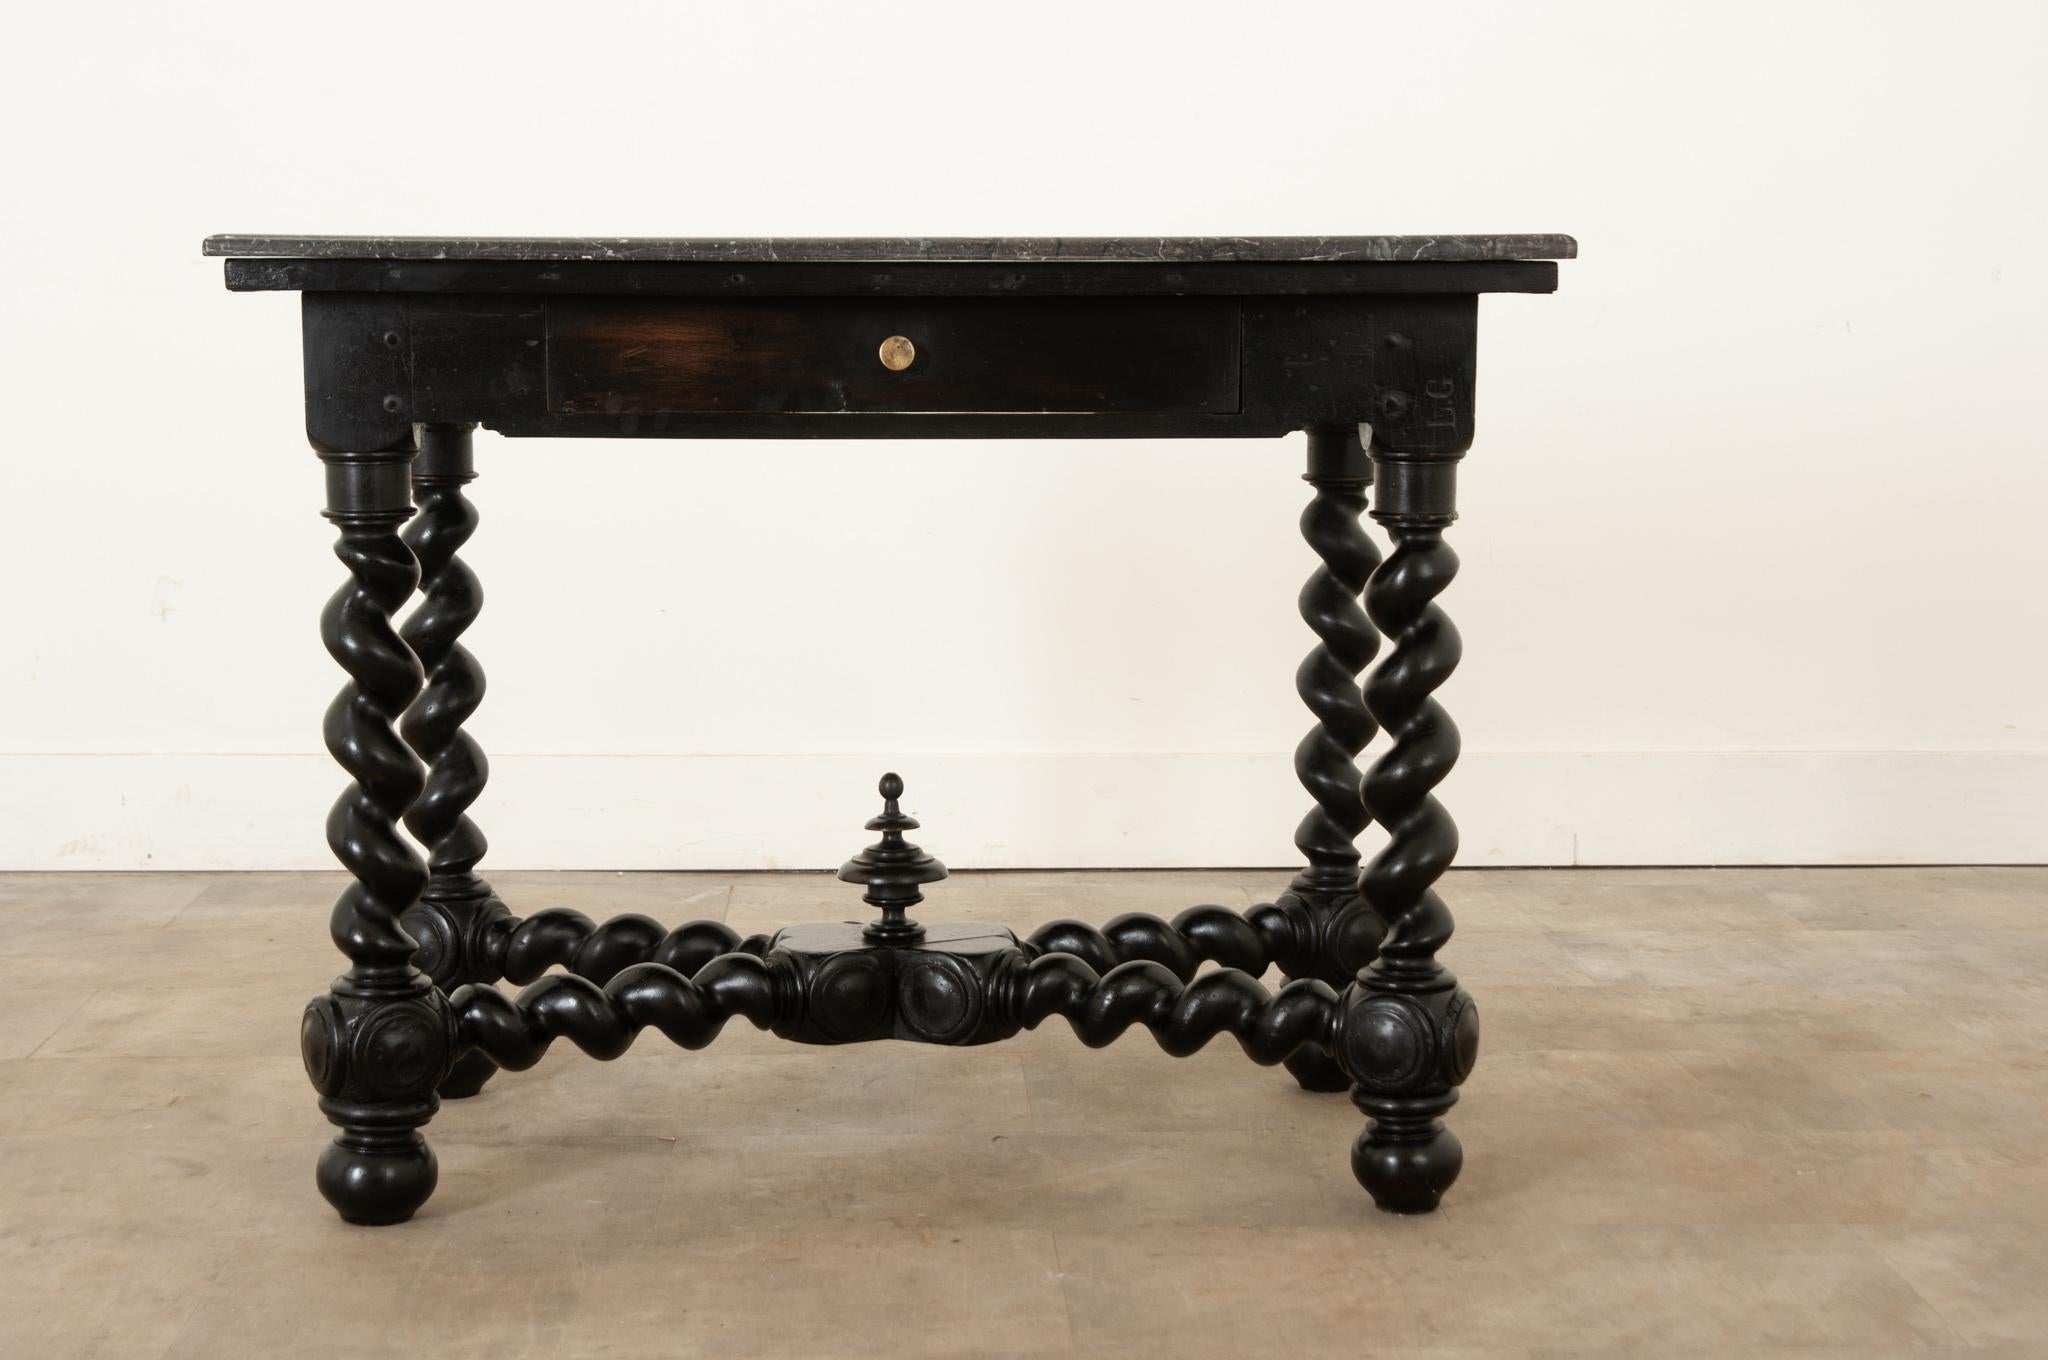 A splendid English ebonized table, made in the 19th century in the Carolean/Restoration style of Charles II, with a more recent stone top. The rectangular top is of a gorgeous marble that showcases veining that runs across its whole surface. A